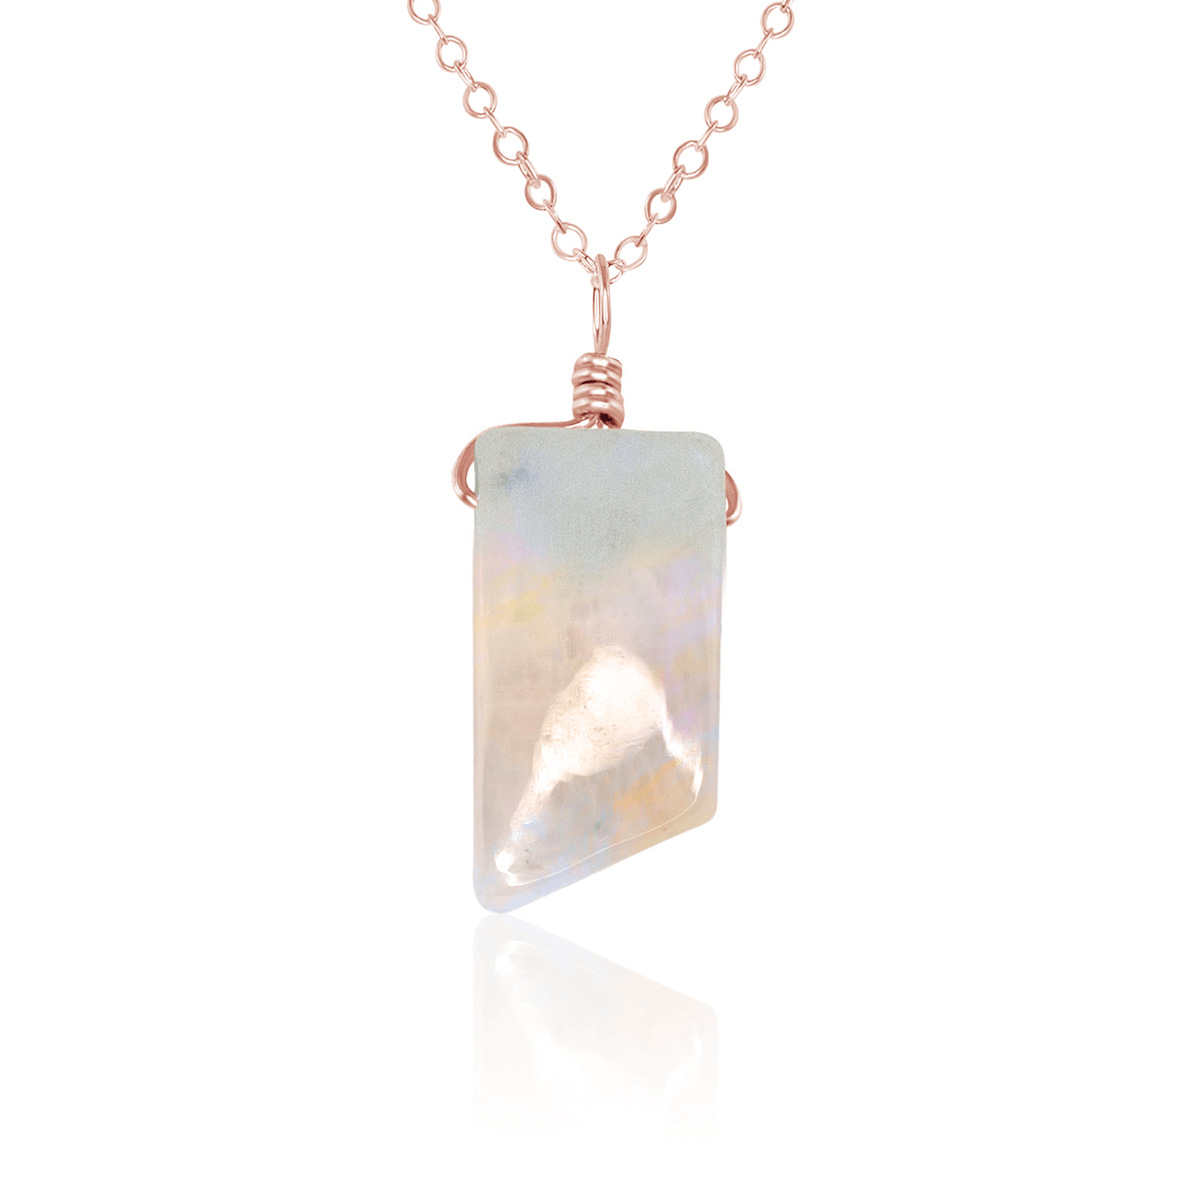 Small Smooth Rainbow Moonstone Gentle Point Crystal Pendant Necklace - Small Smooth Rainbow Moonstone Gentle Point Crystal Pendant Necklace - 14k Rose Gold Fill / Cable - Luna Tide Handmade Crystal Jewellery